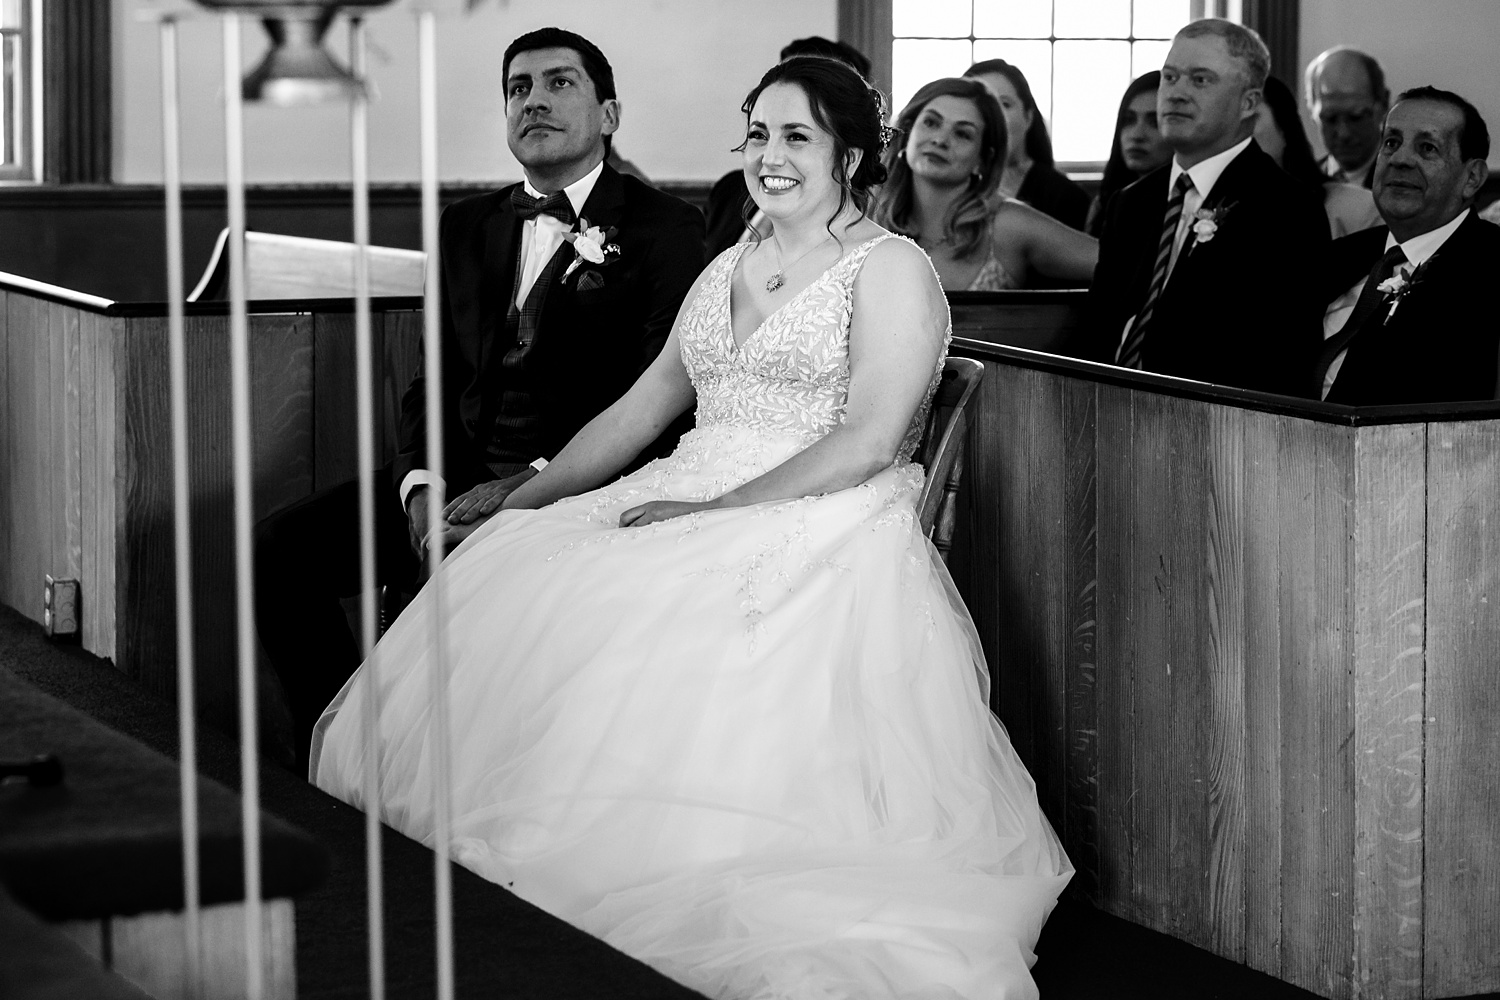 The bride and groom listen to readings on the wedding day